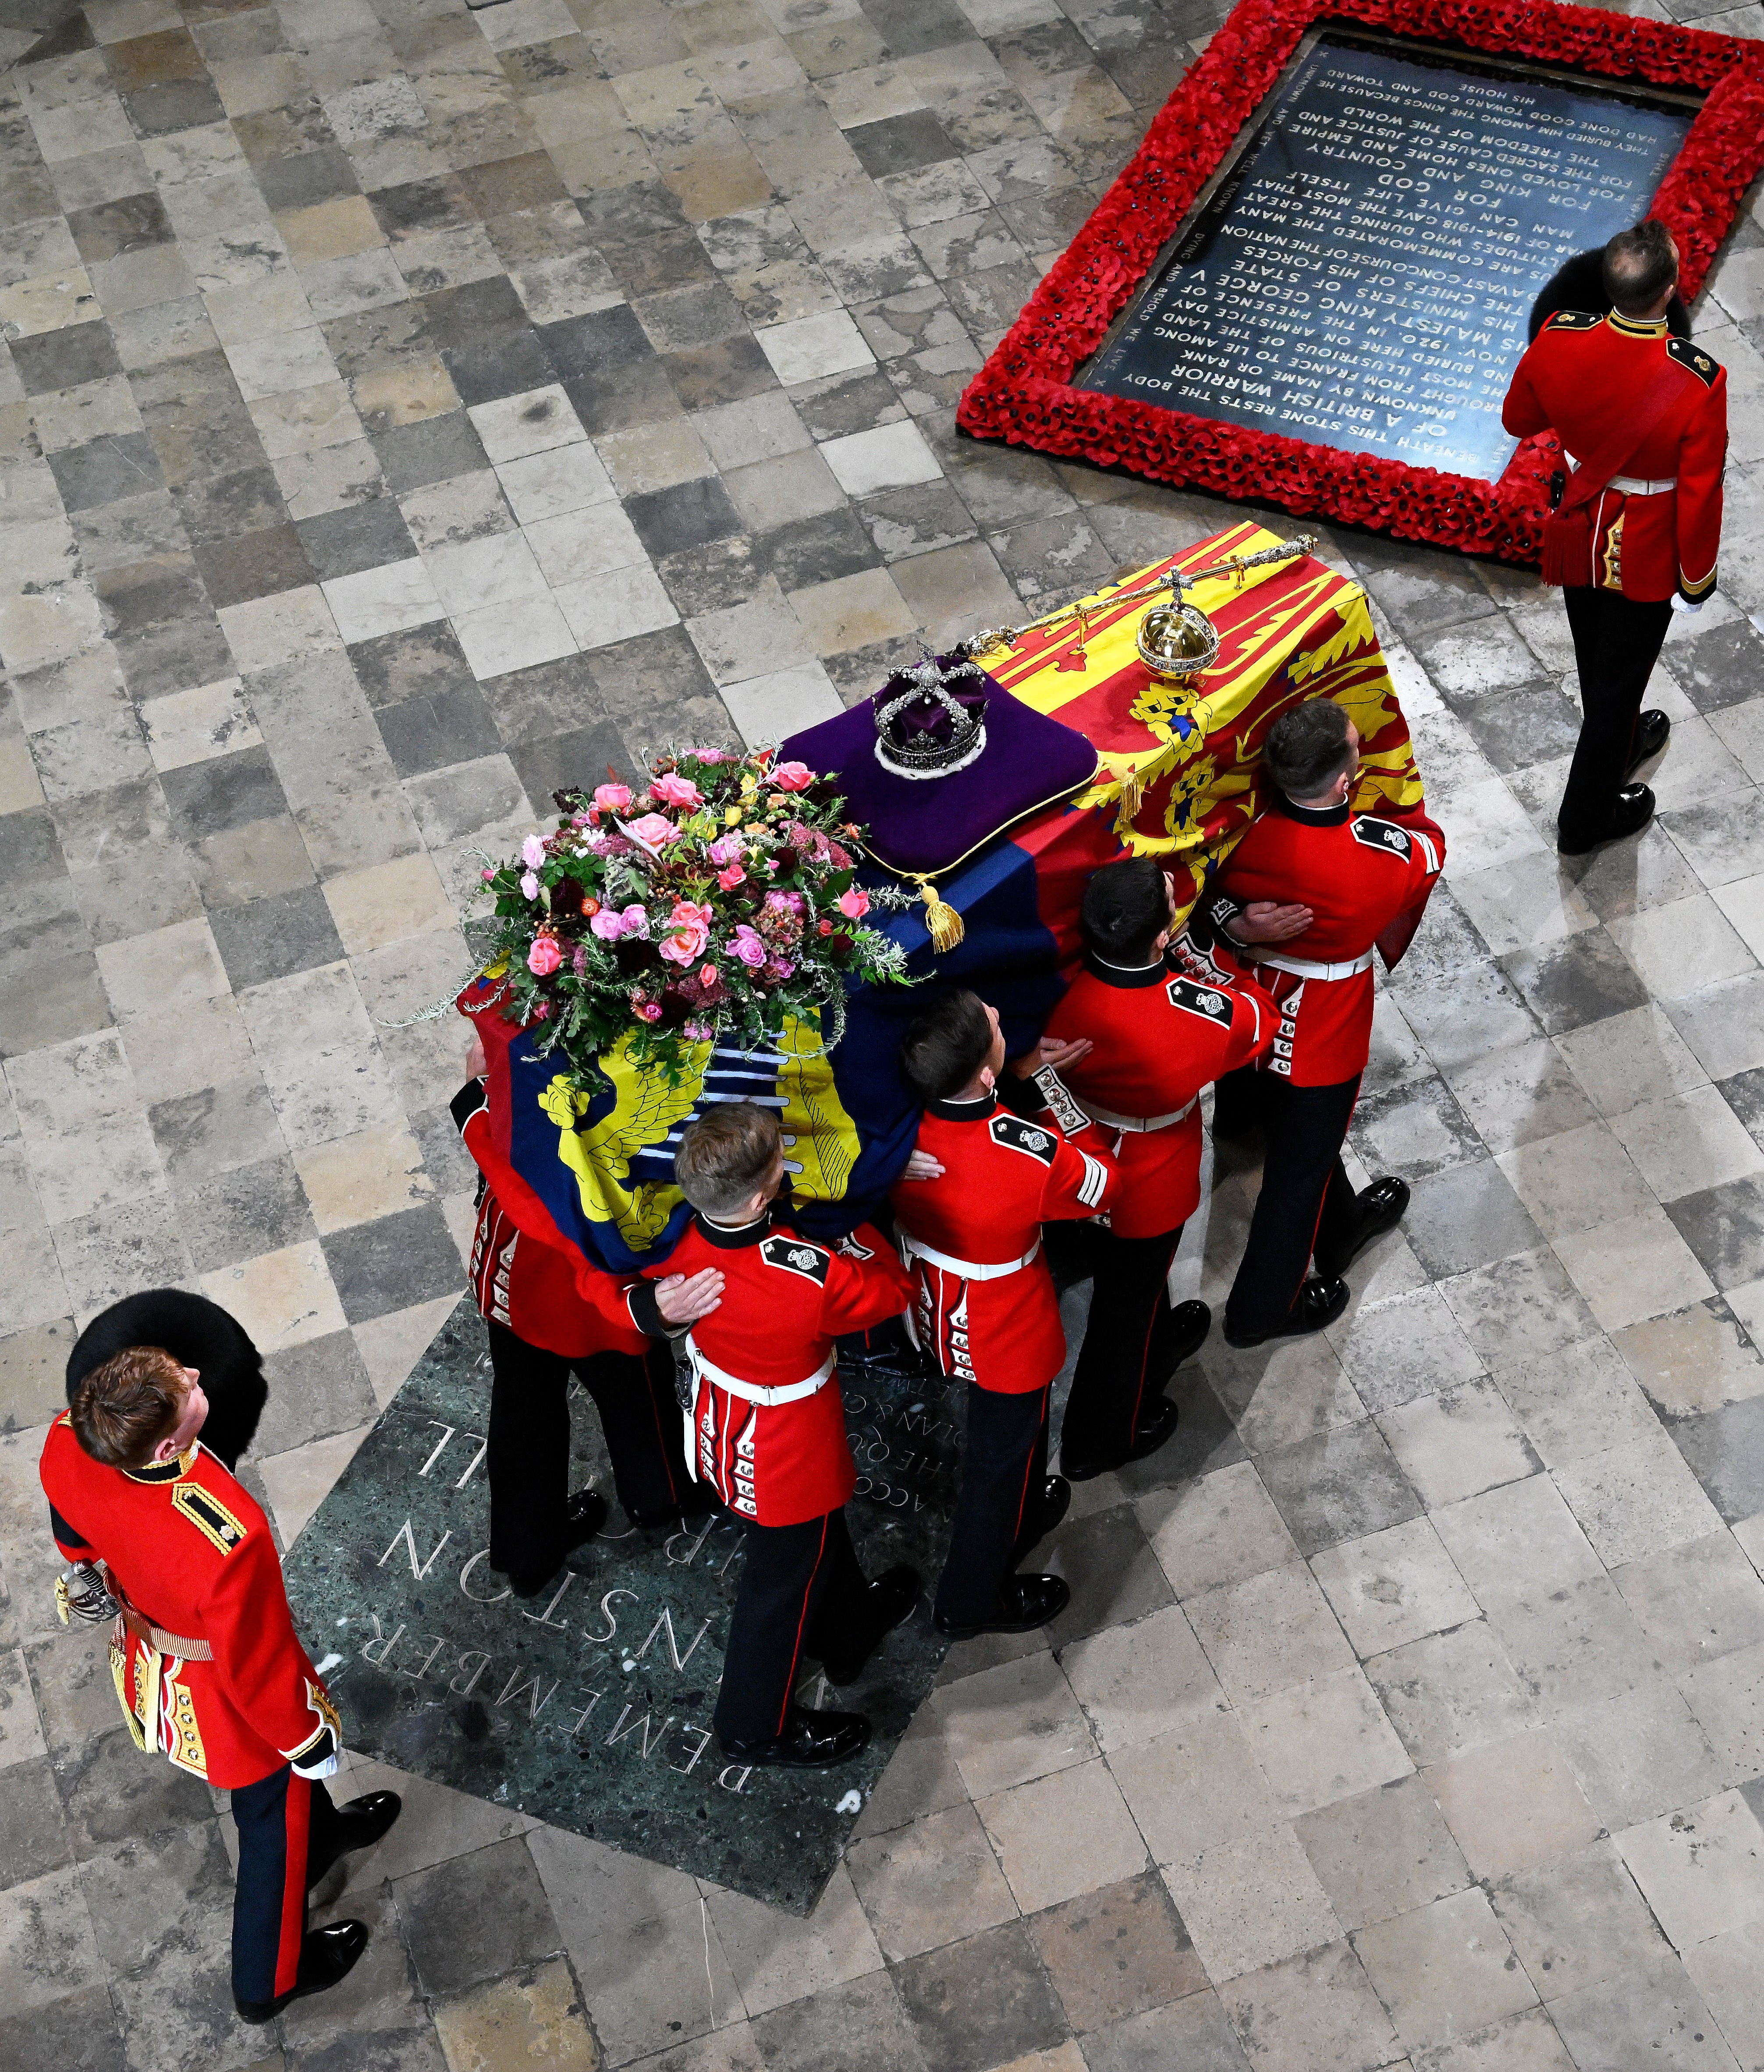 The bearer party was made up of members of the Queen’s Company 1st Battalion Grenadier Guards (Gareth Cattermole/PA)